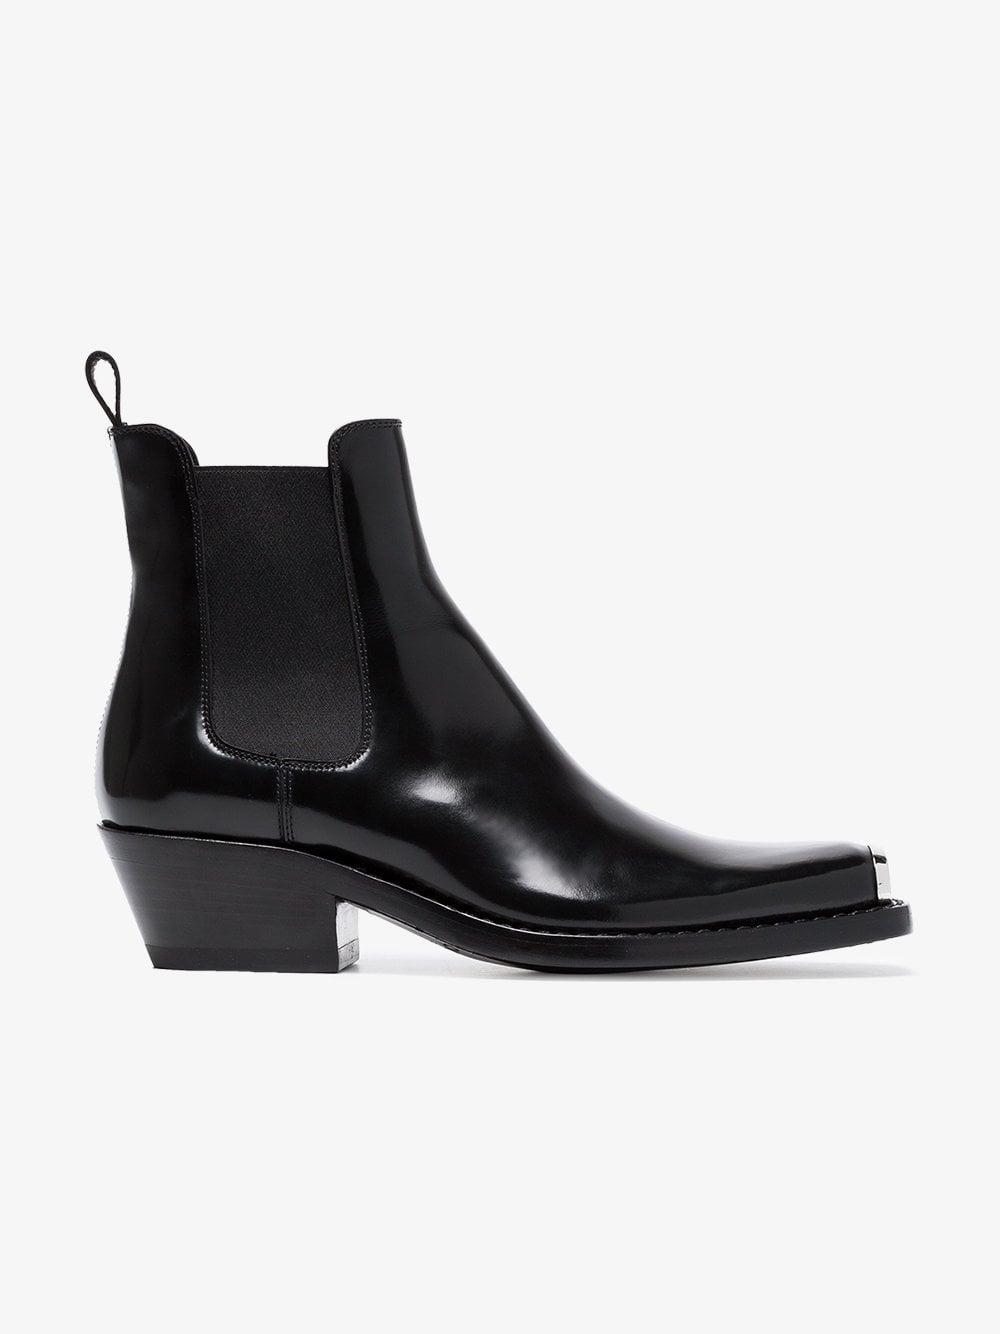 CALVIN KLEIN 205W39NYC Claire 40 Western Ankle Boots in Black | Lyst